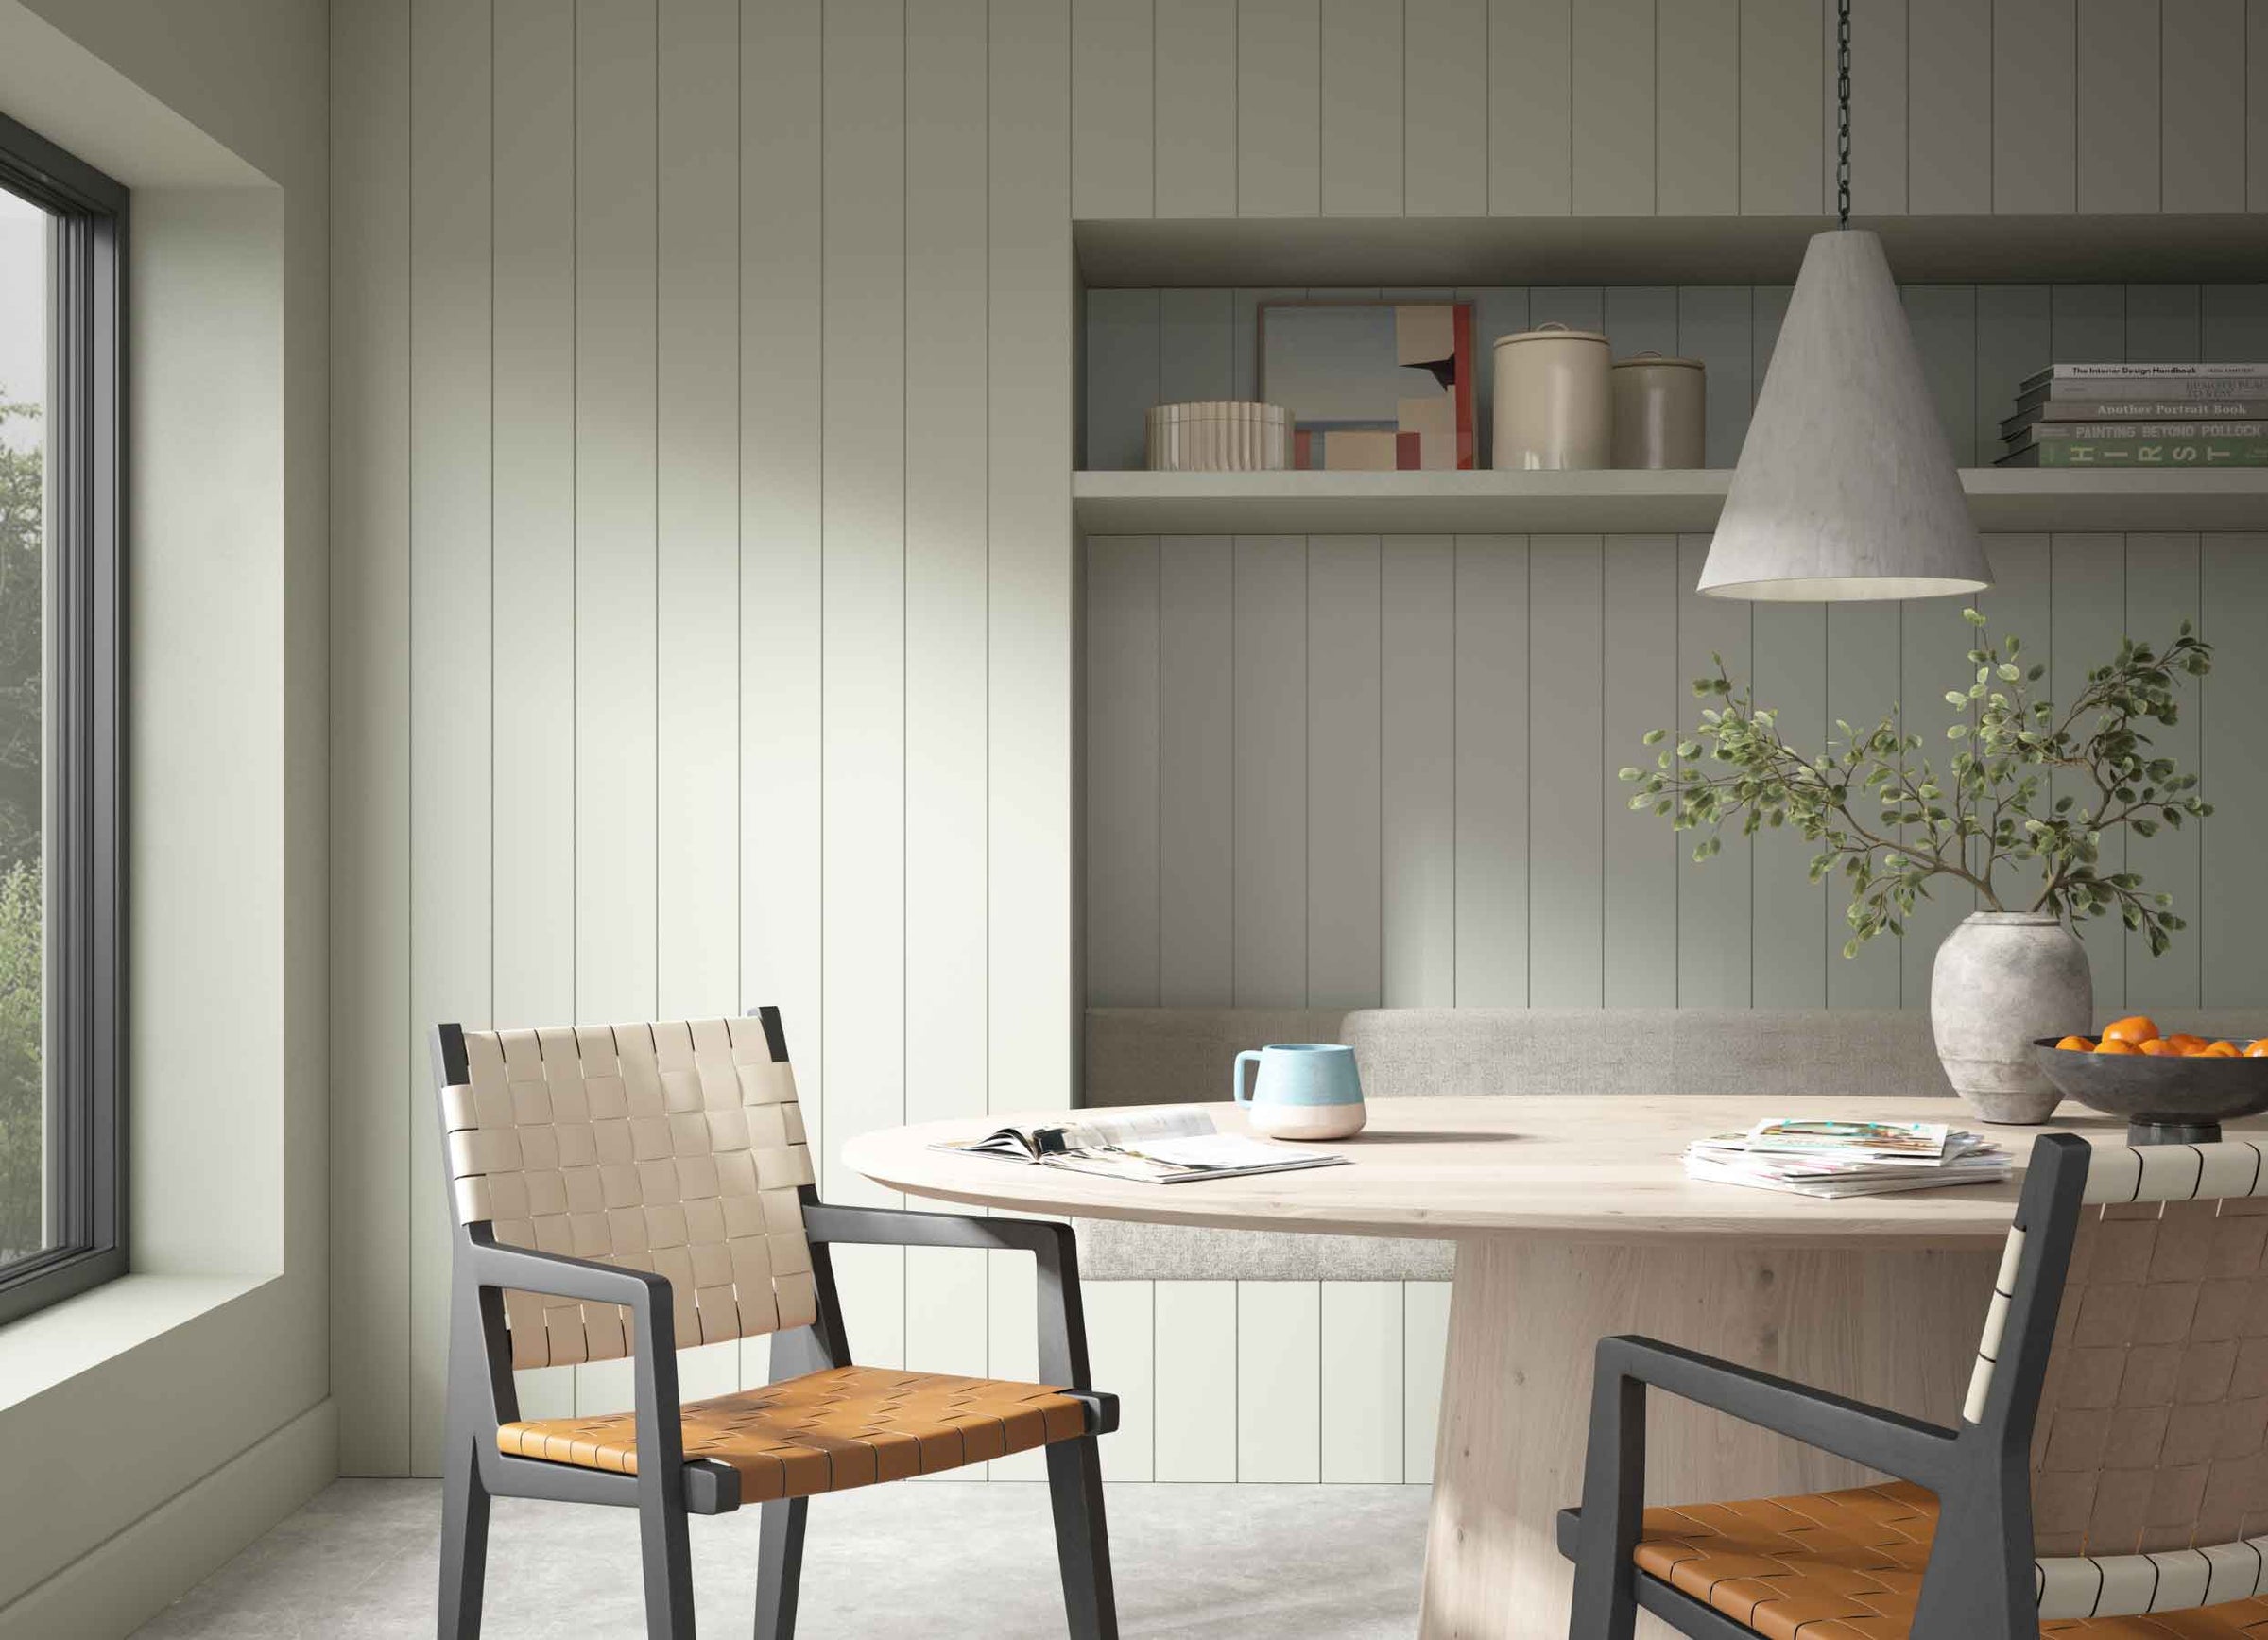 Green Tongue and Groove wall panelling in a dining room with a neutral table, two-tone woven chairs and grey accessories.